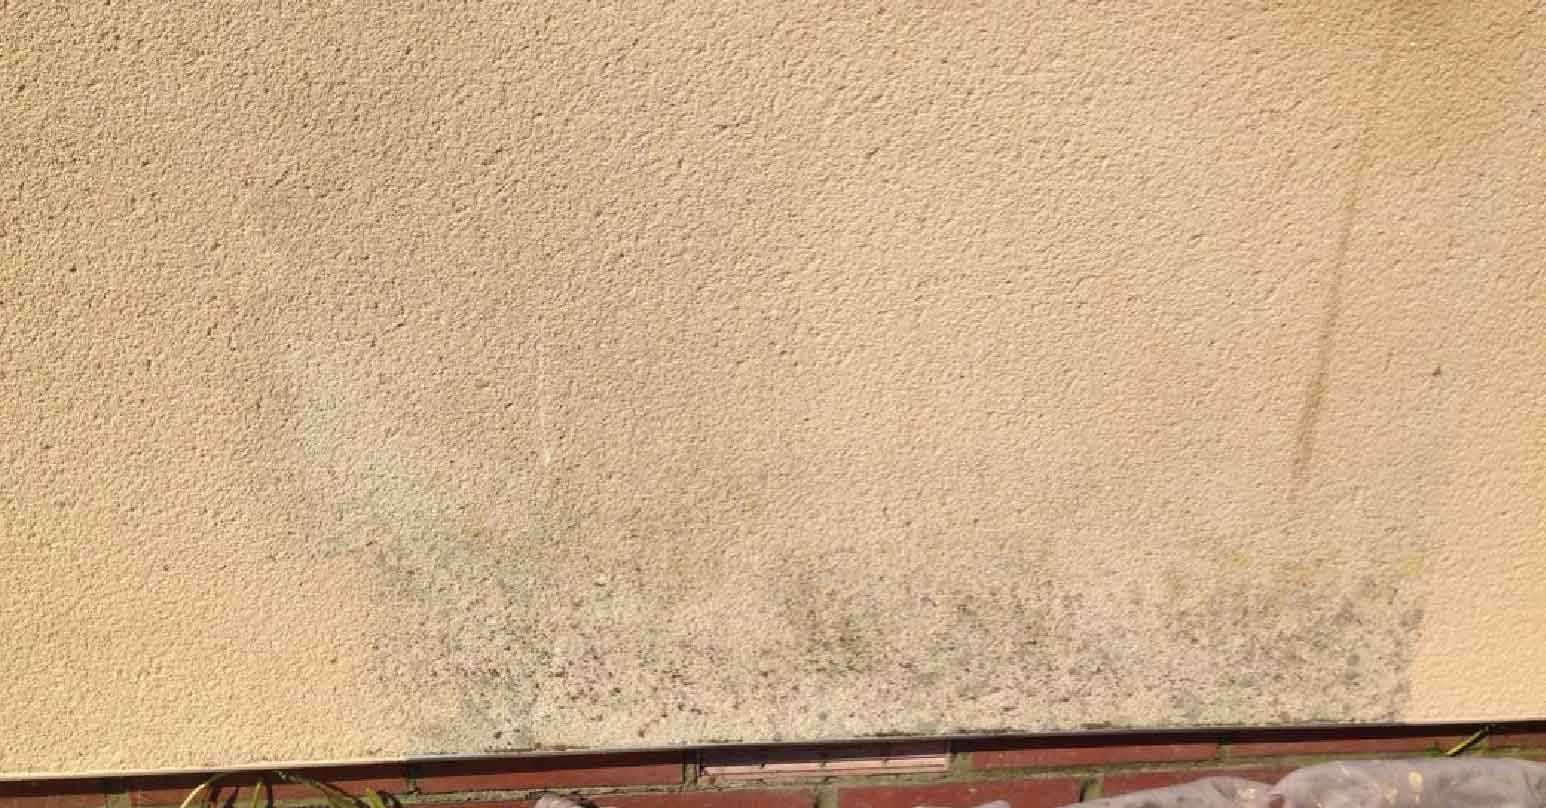 Stained wall render - Before repair